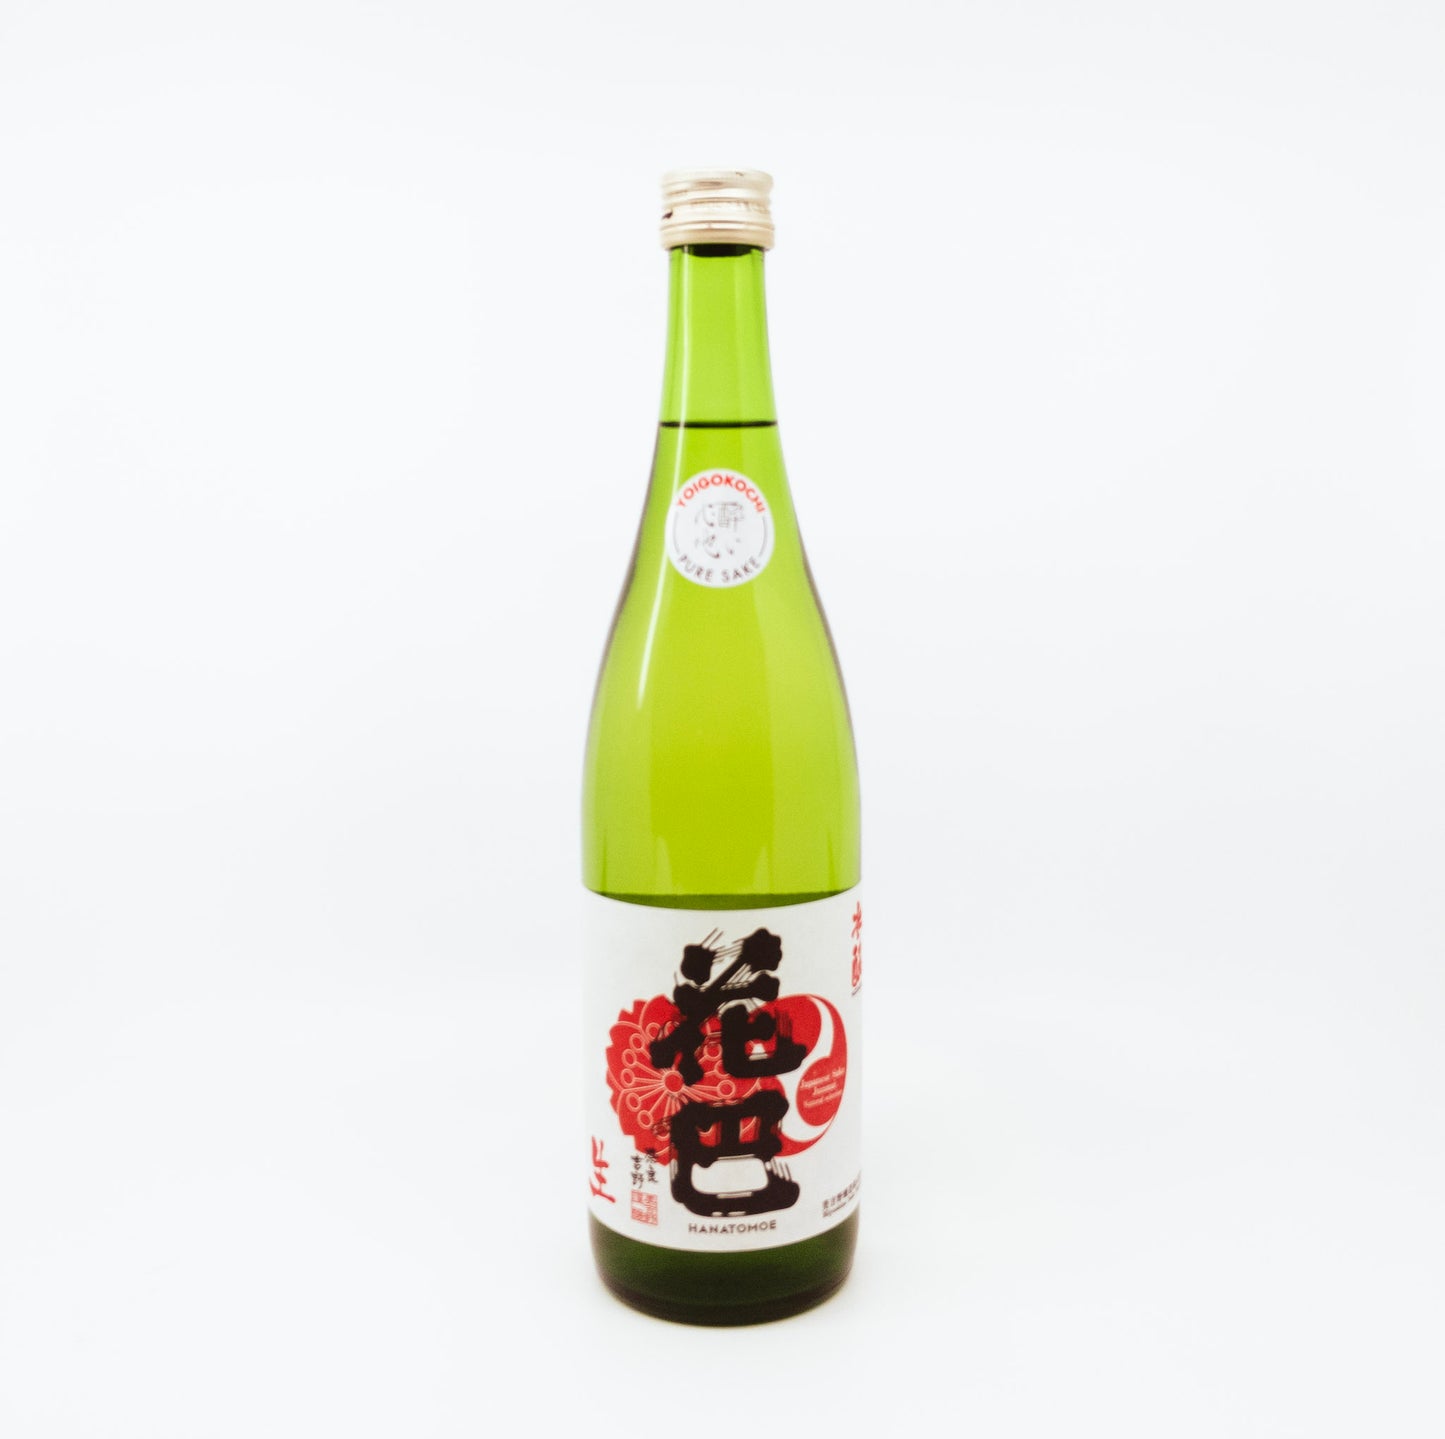 green bottle with red circle on label